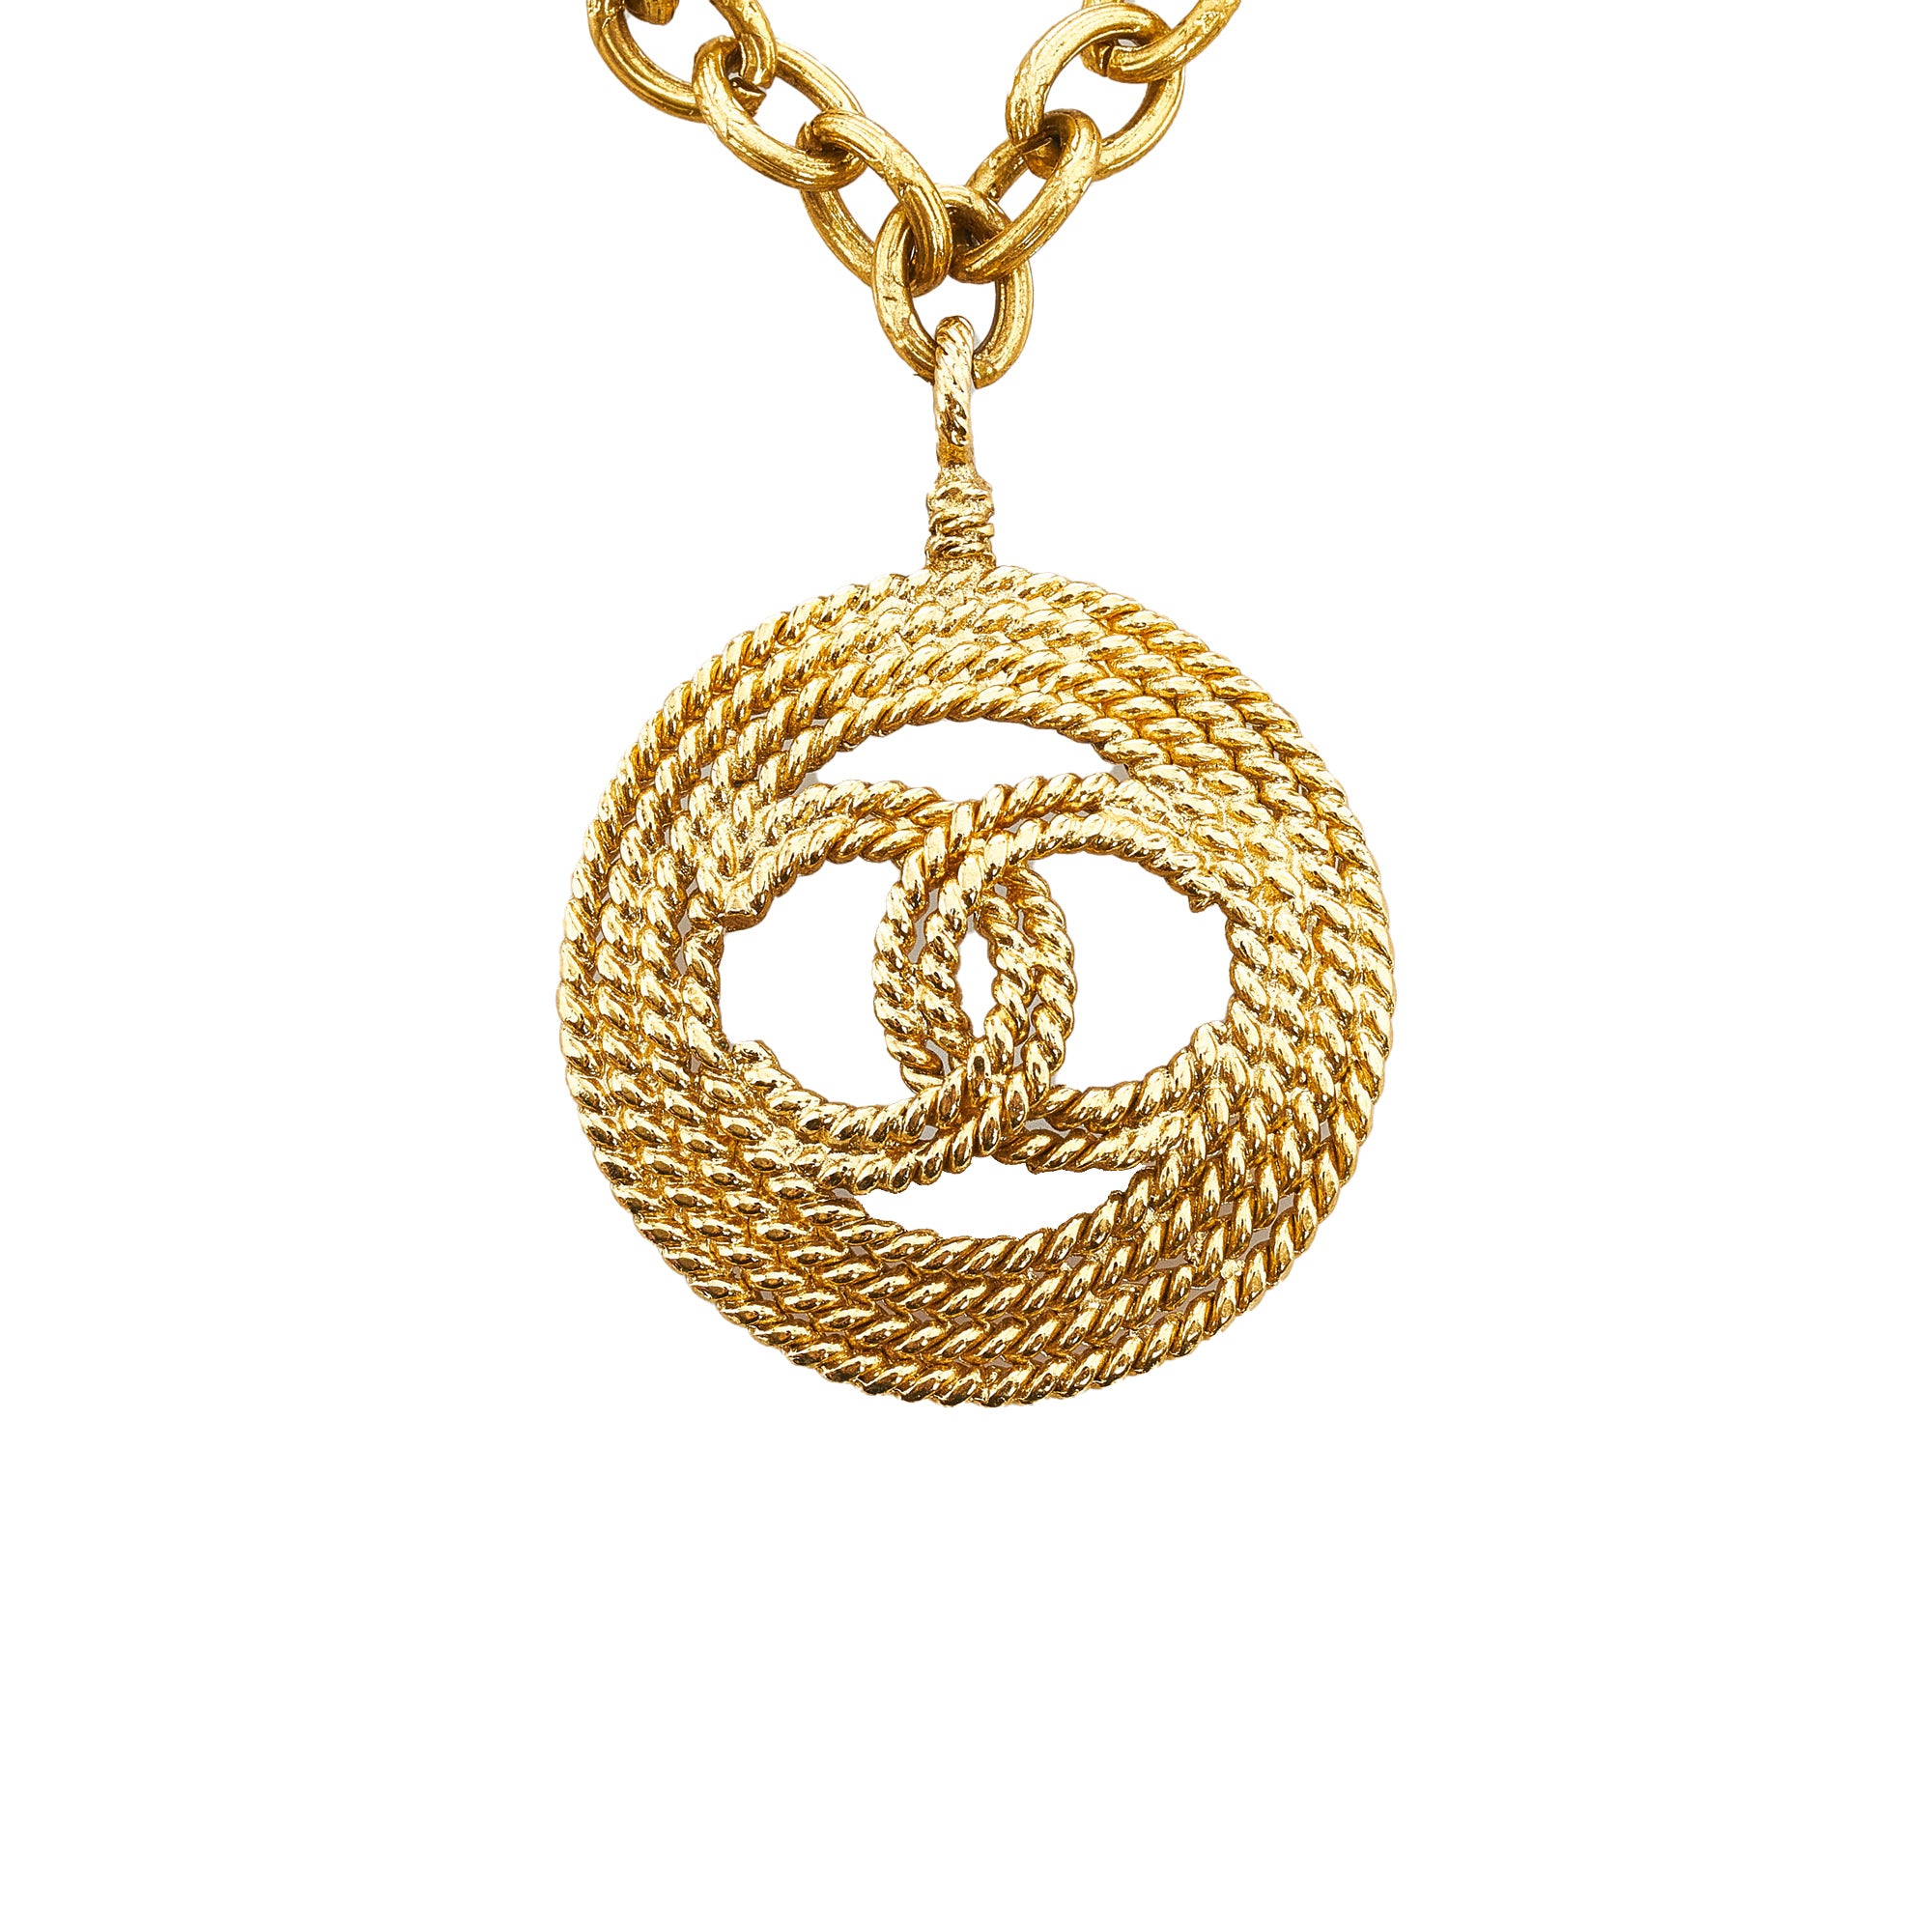 Chanel Pre-Owned 2001 ribbed knit striped top, Gold Chanel CC Pendant  Necklace